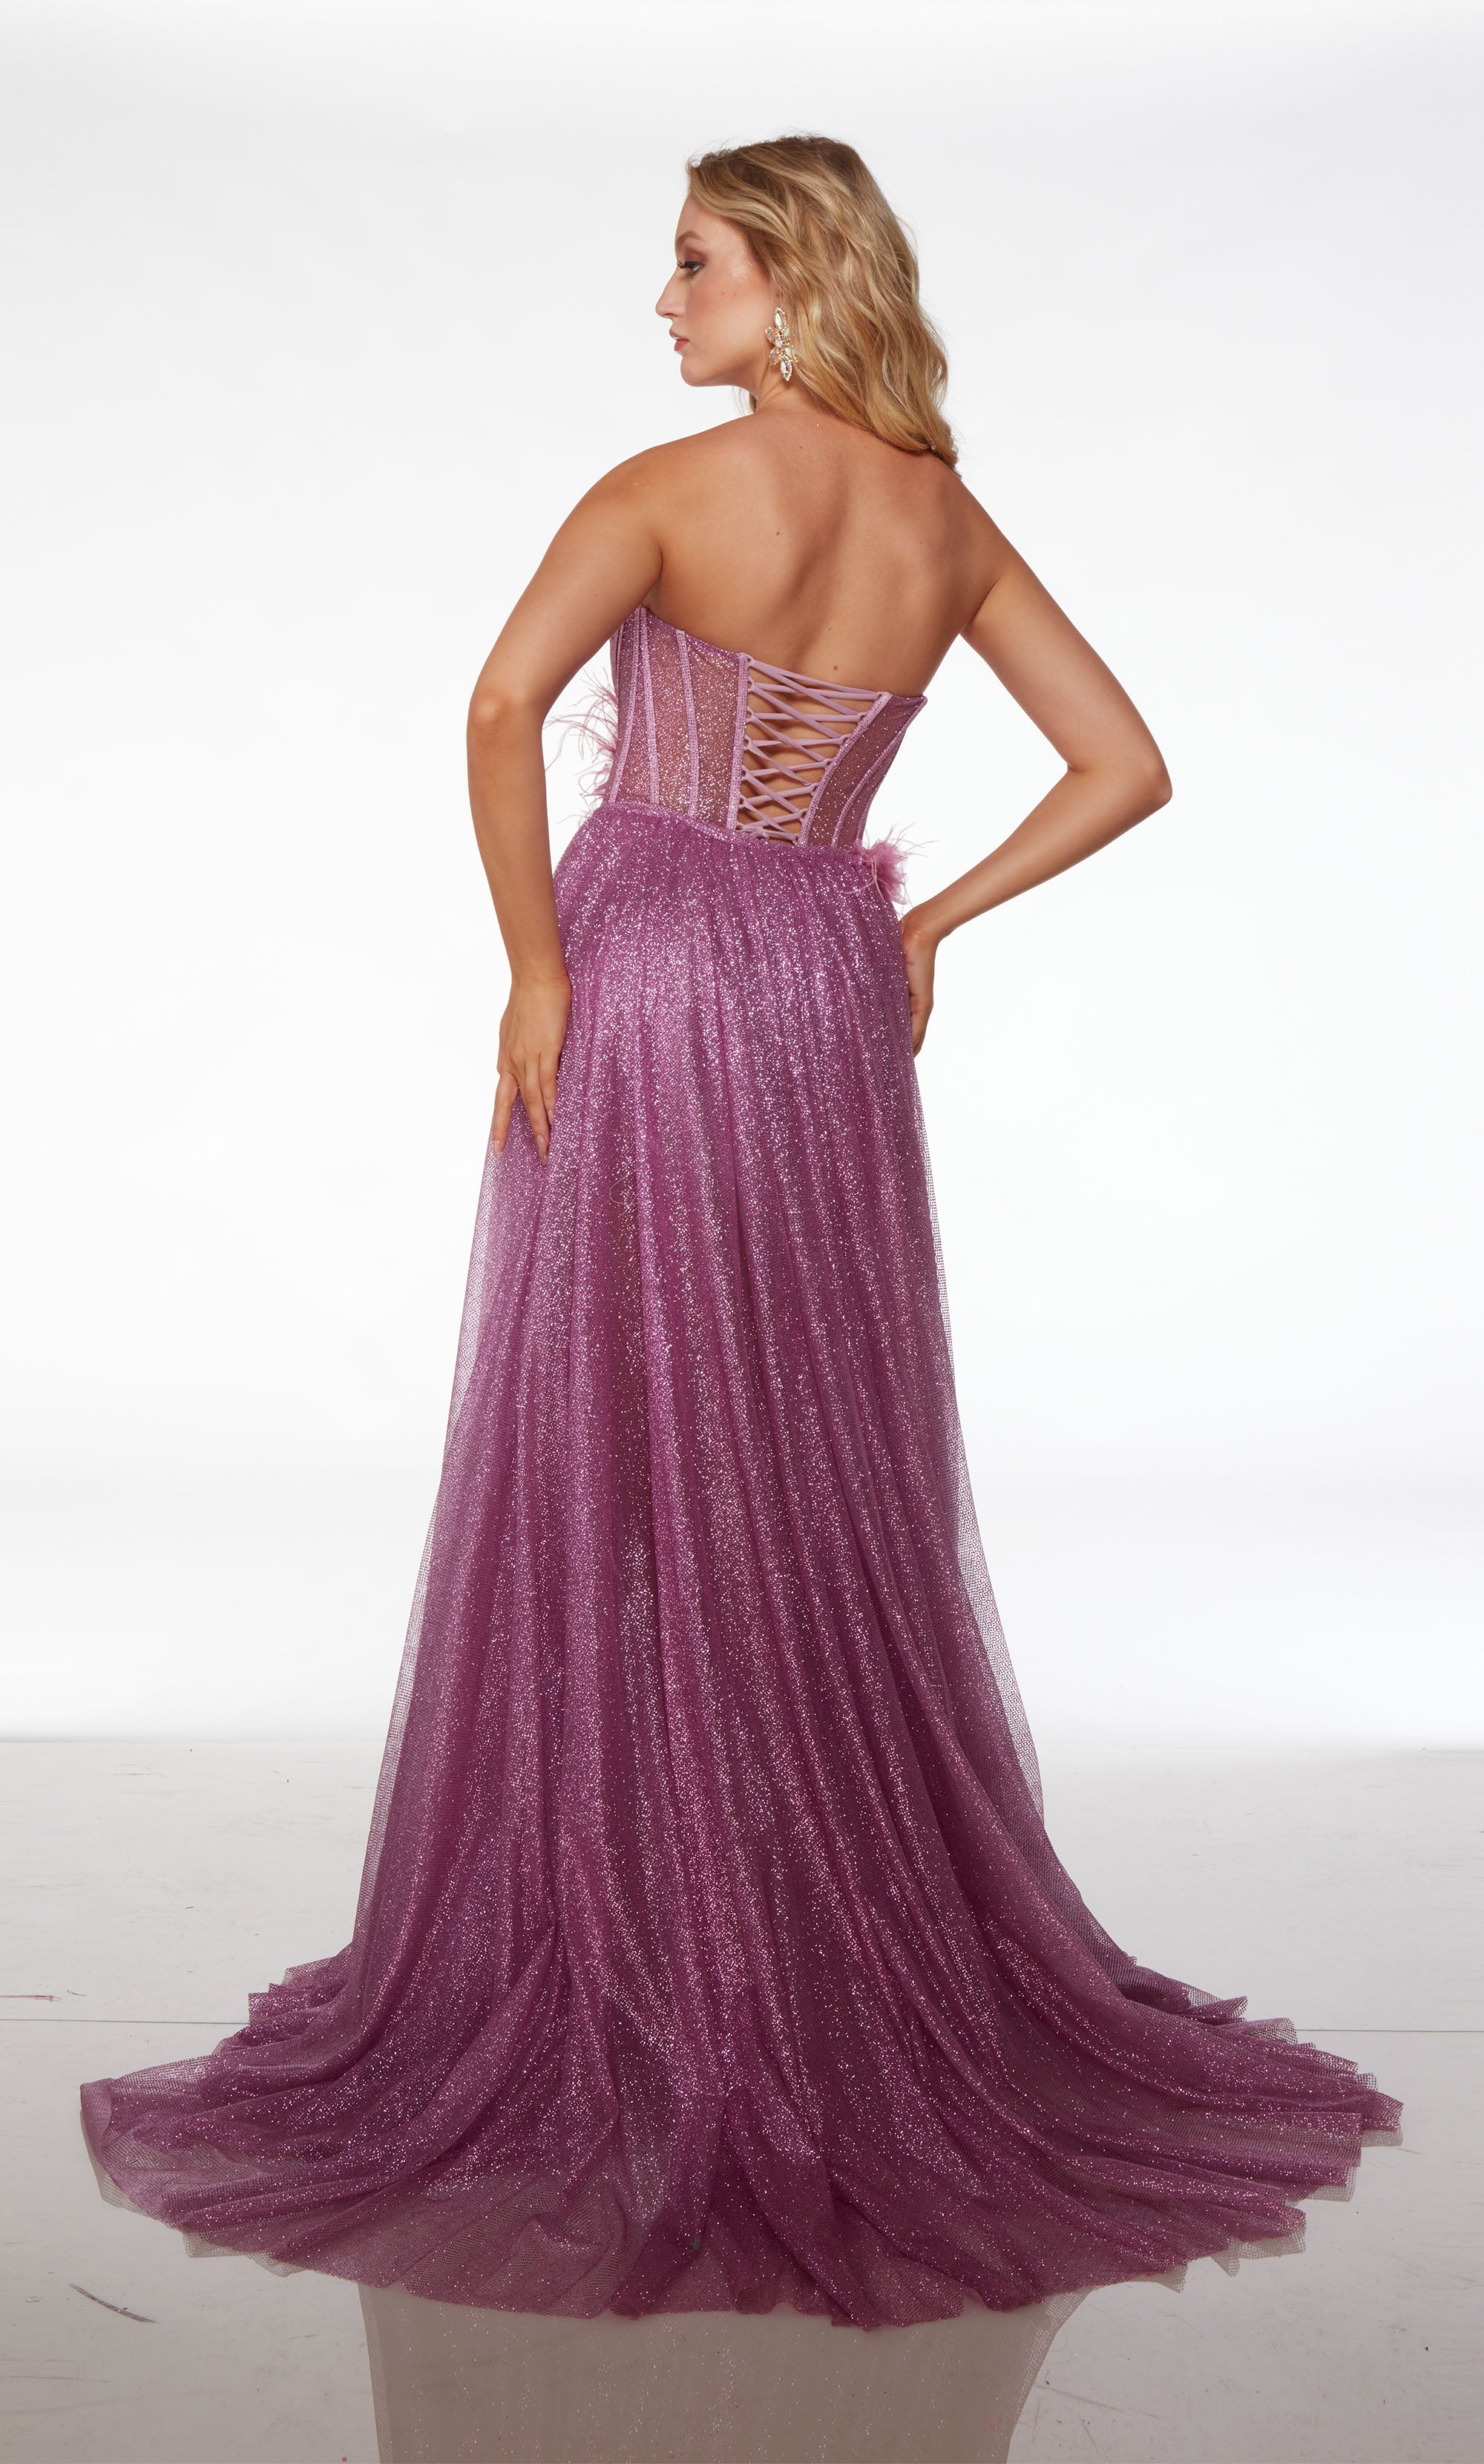 Purple glitter tulle prom dress: strapless corset, lace-up back, short hemline, long detachable skirt with 3D flower accents at the waist.